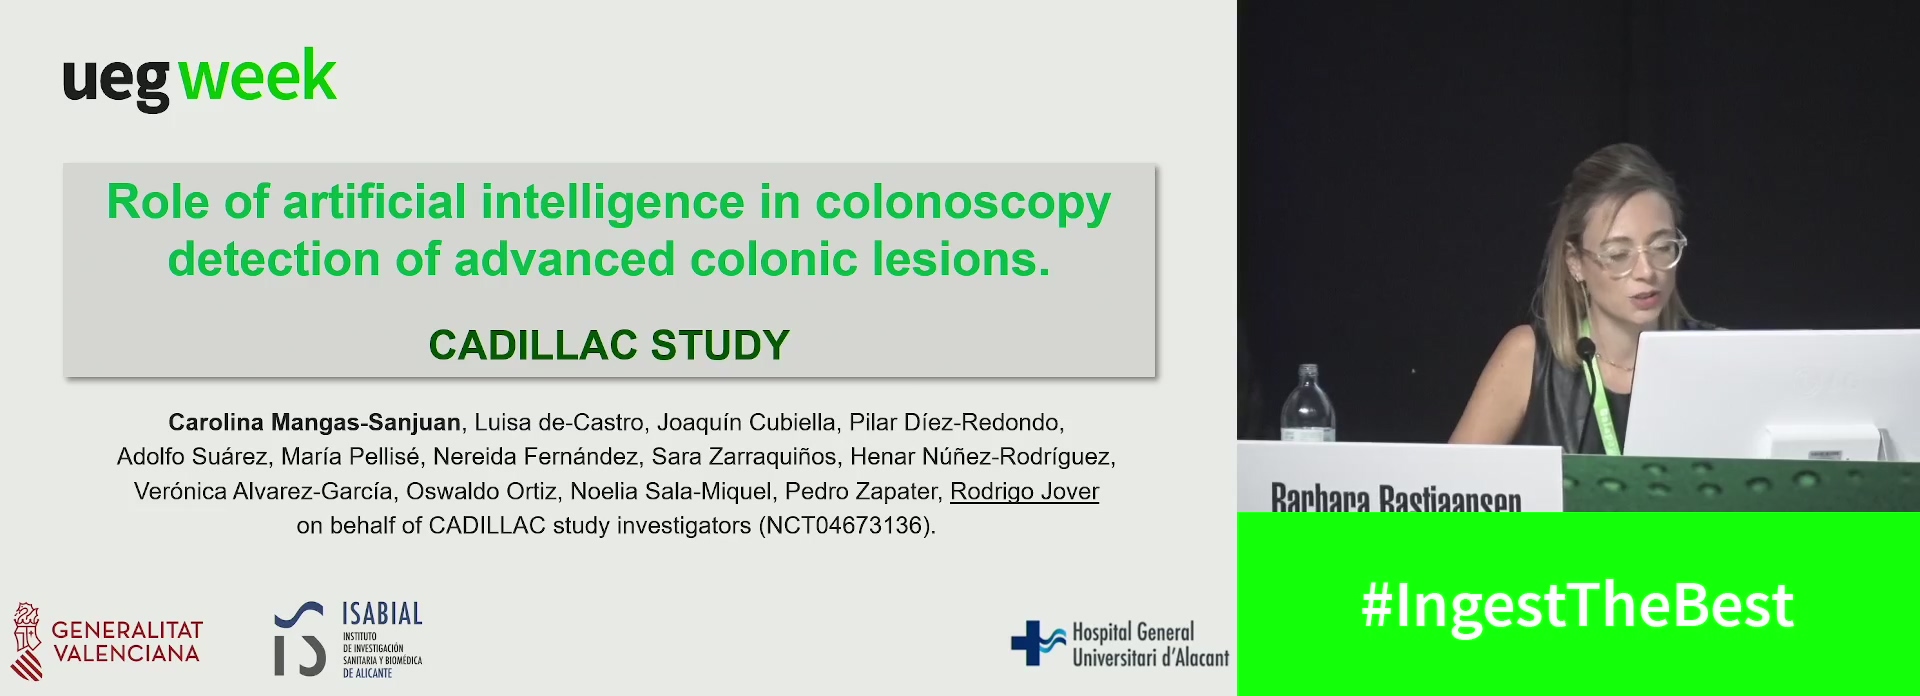 ROLE OF ARTIFICIAL INTELLIGENCE IN COLONOSCOPY DETECTION OF ADVANCED LESIONS